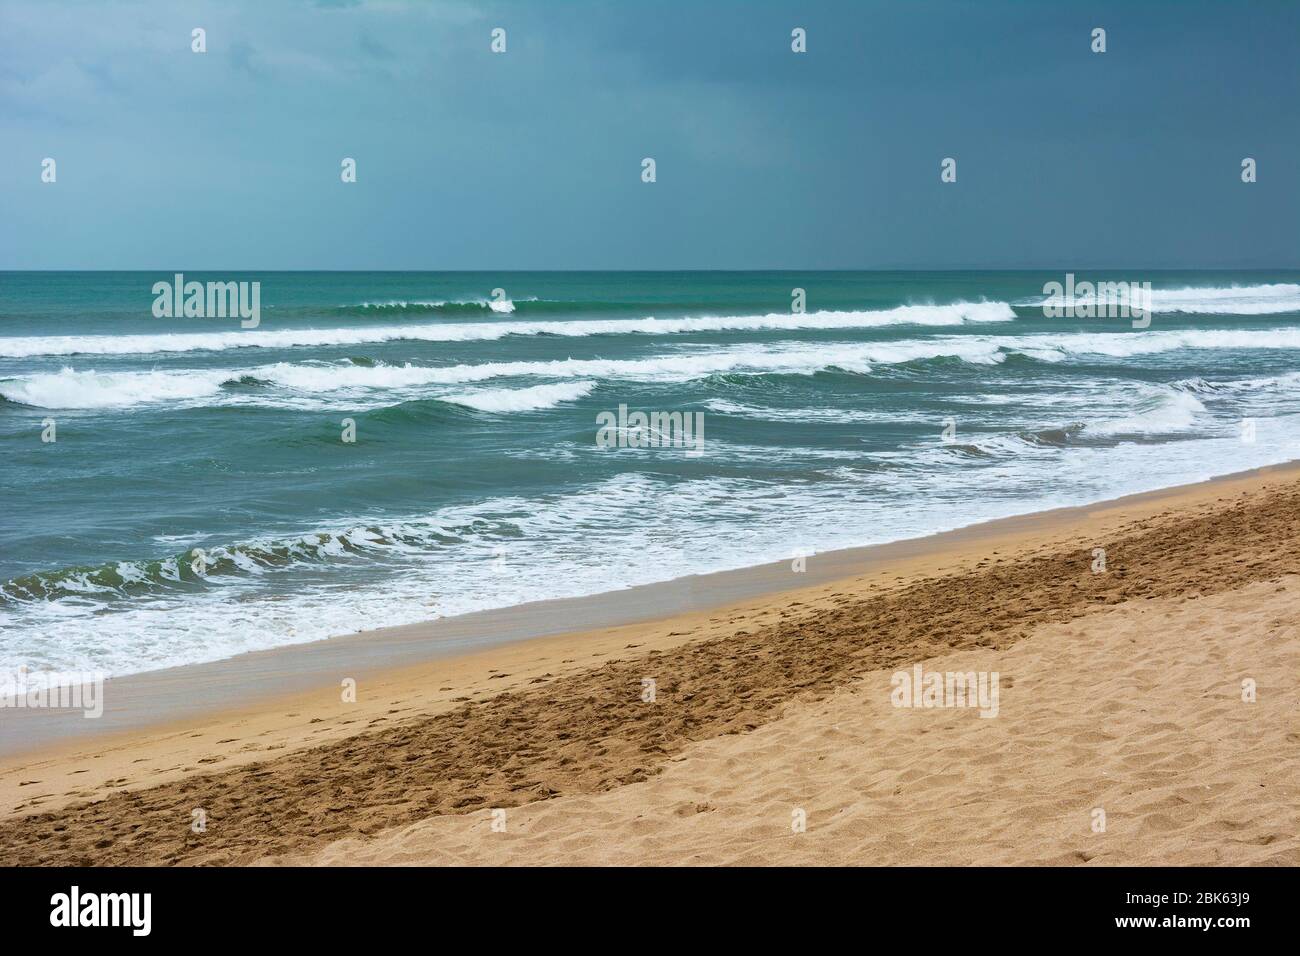 Empty or deserted Kuta Beach in Badung Regency, Bali, Indonesia. Government has been urging people to stay at home to reduce the spread of covid-19. Stock Photo